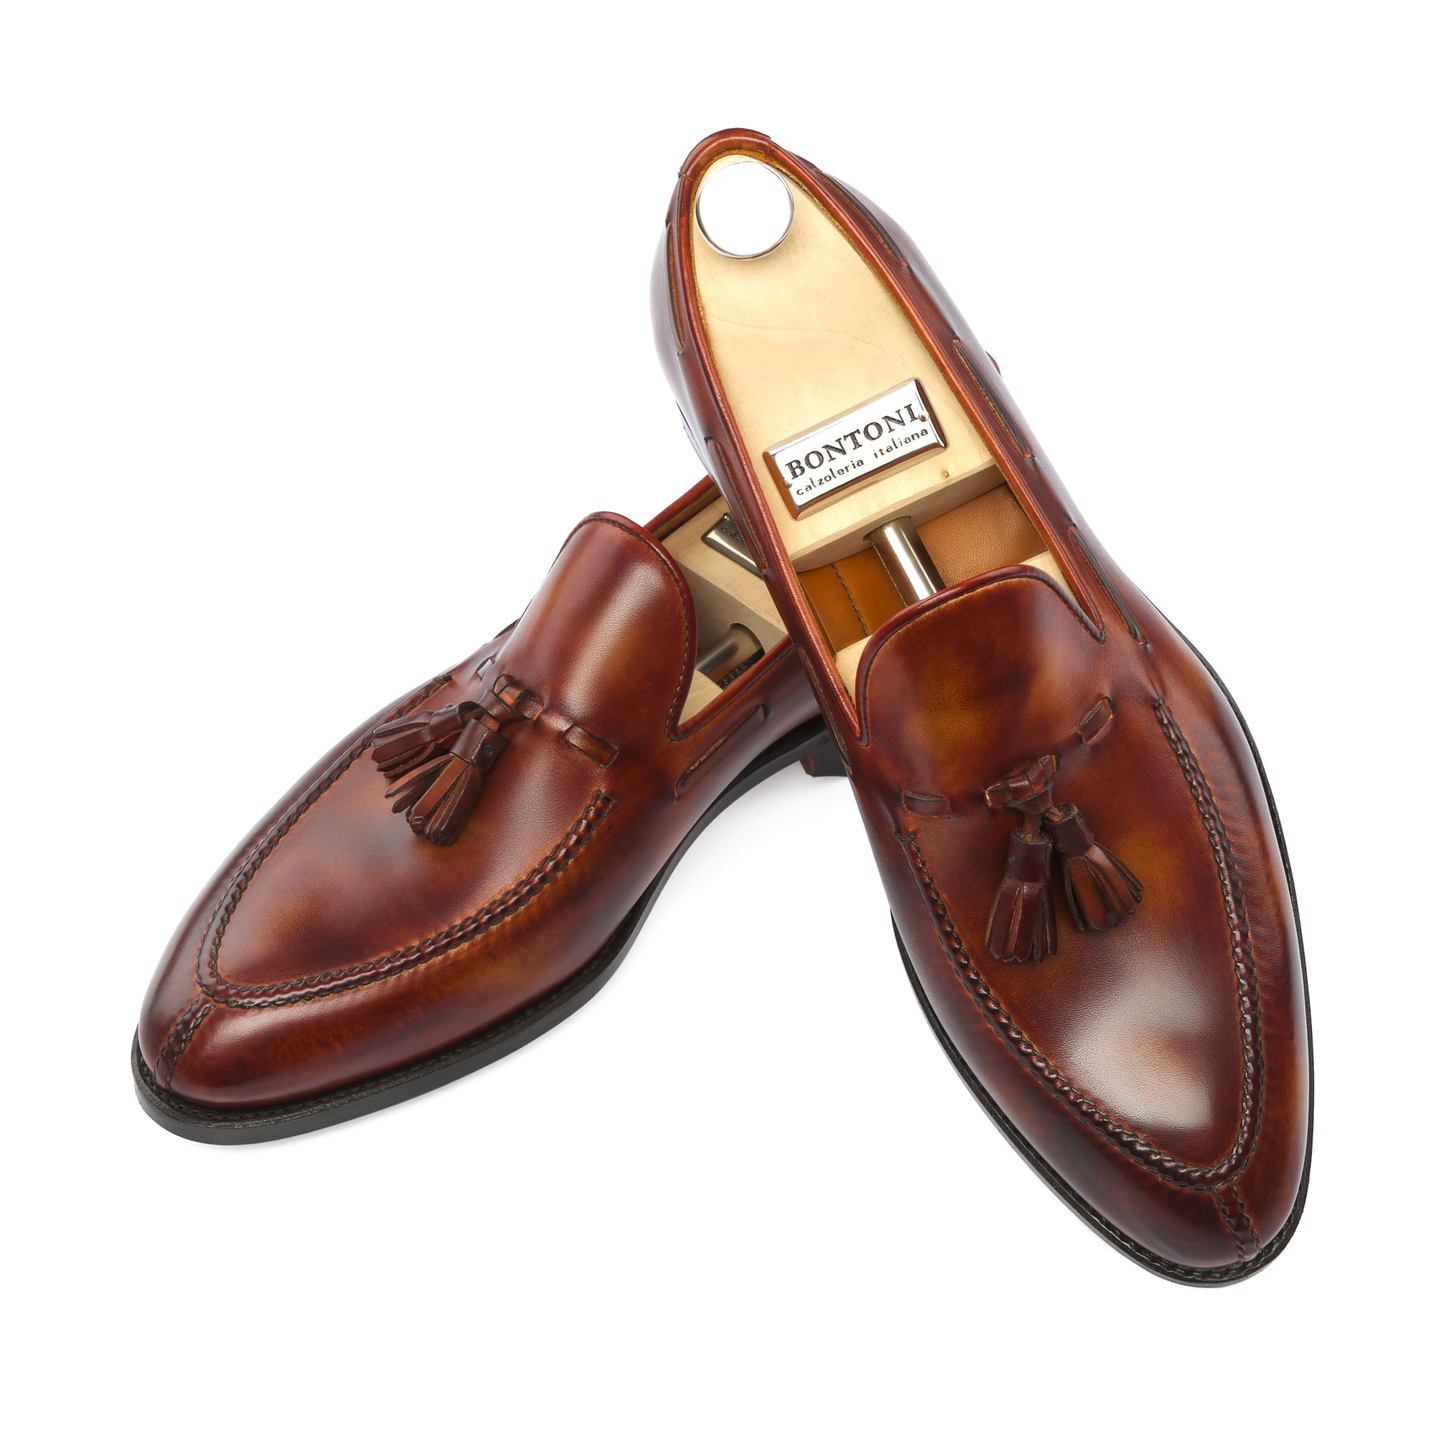 Bontoni "Conte Max" Classic Tassel Loafer with a Hand-Stitched Apron - SARTALE